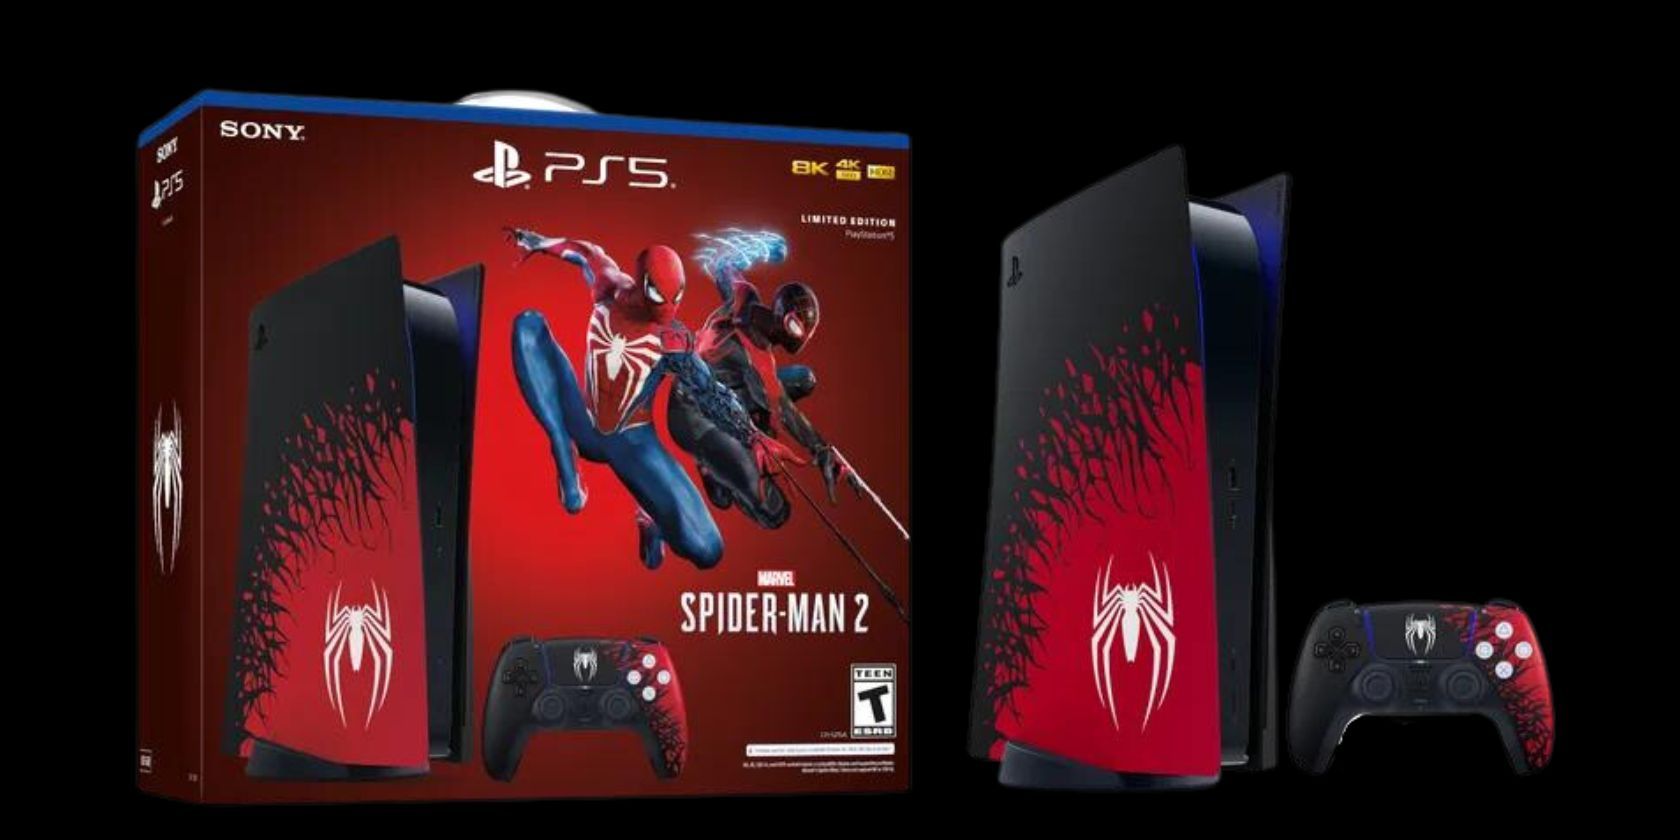 Spiderman 2 limited edition PS5 console